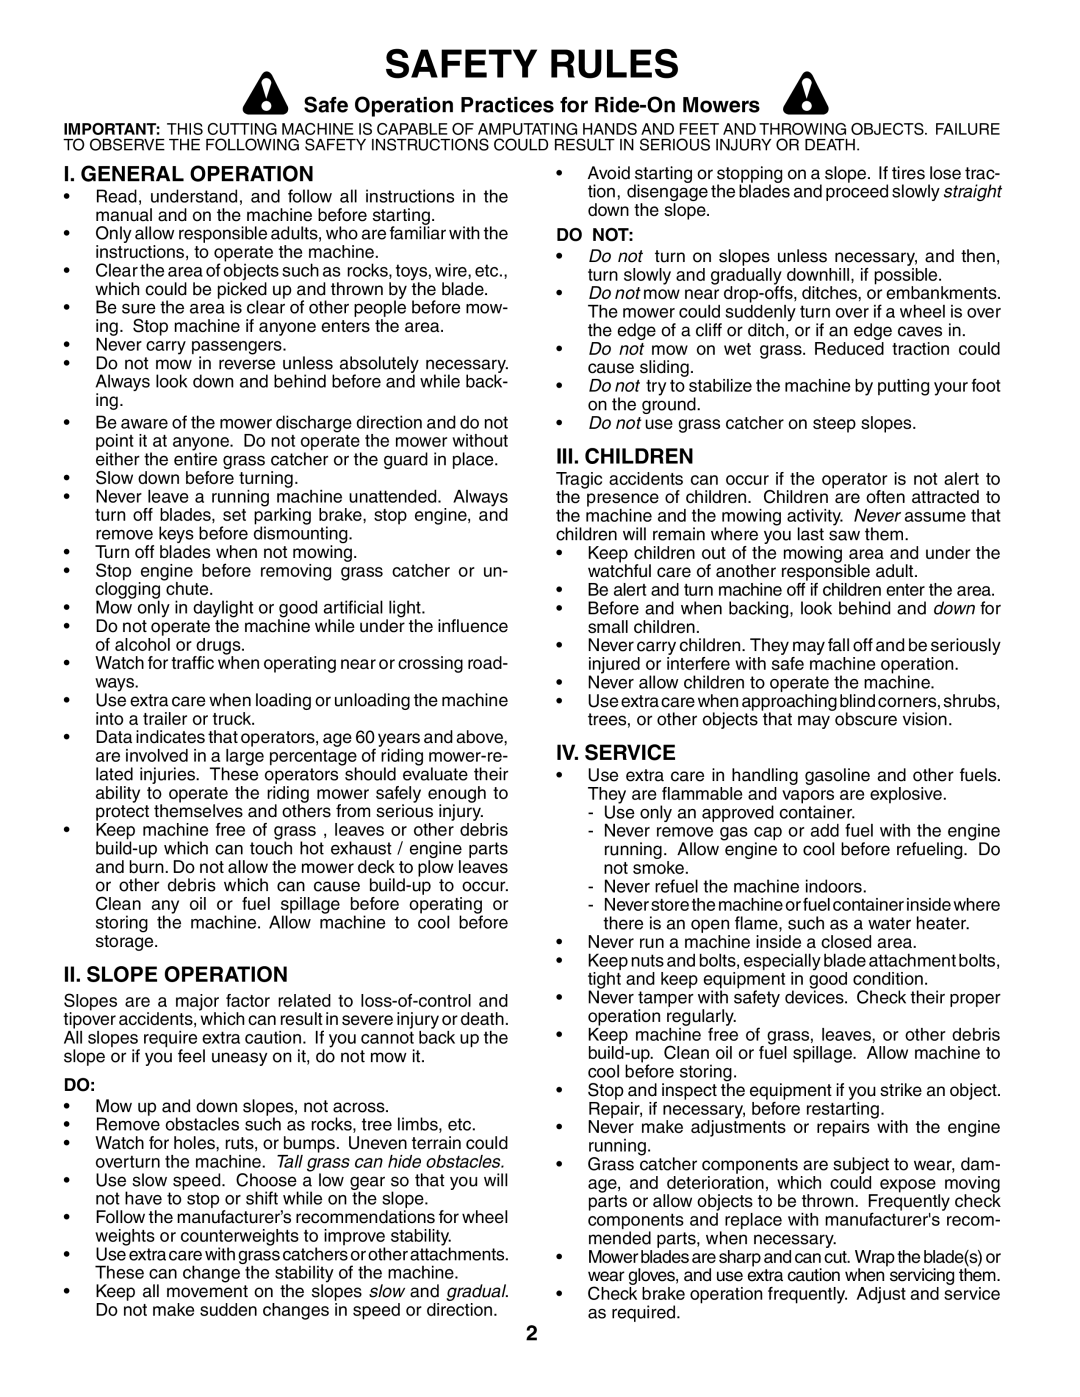 Husqvarna YTH2148 Safety Rules, Safe Operation Practices for Ride-OnMowers, I. General Operation, Ii. Slope Operation 